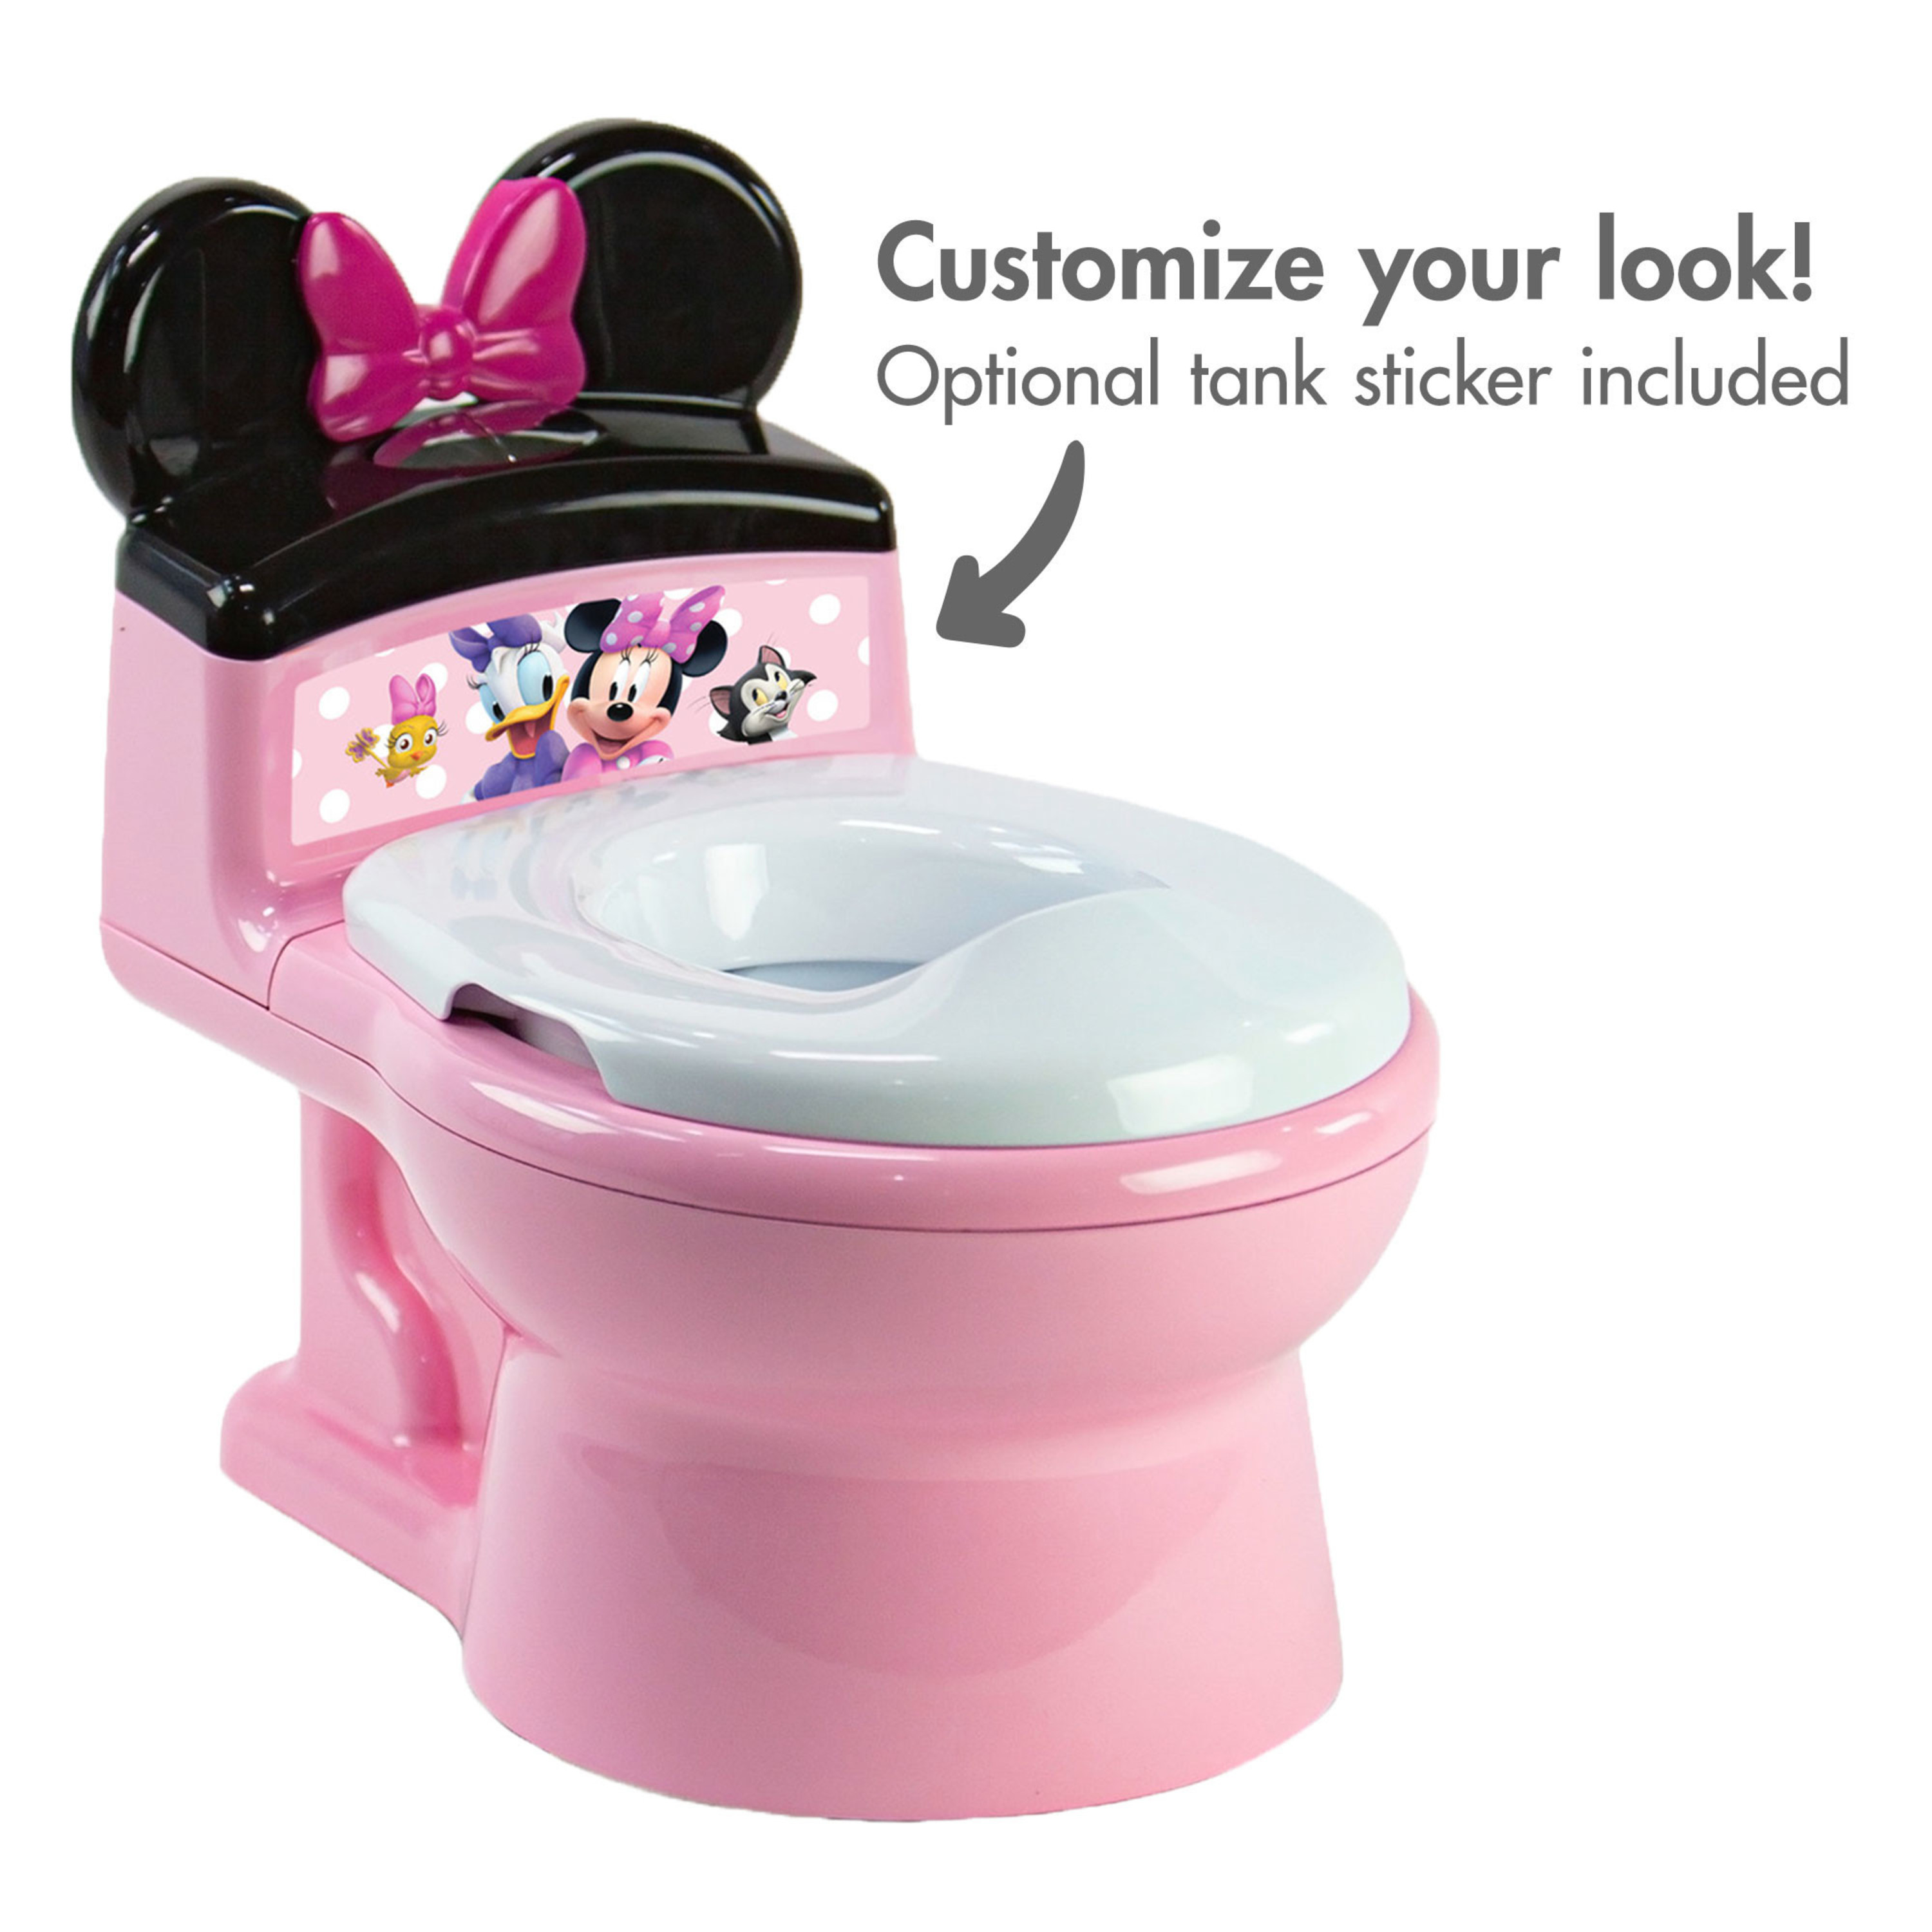 The First Years Disney Minnie Mouse 2-in-1 Potty Training Toilet, Toddler Toilet and Training Seat - image 3 of 9